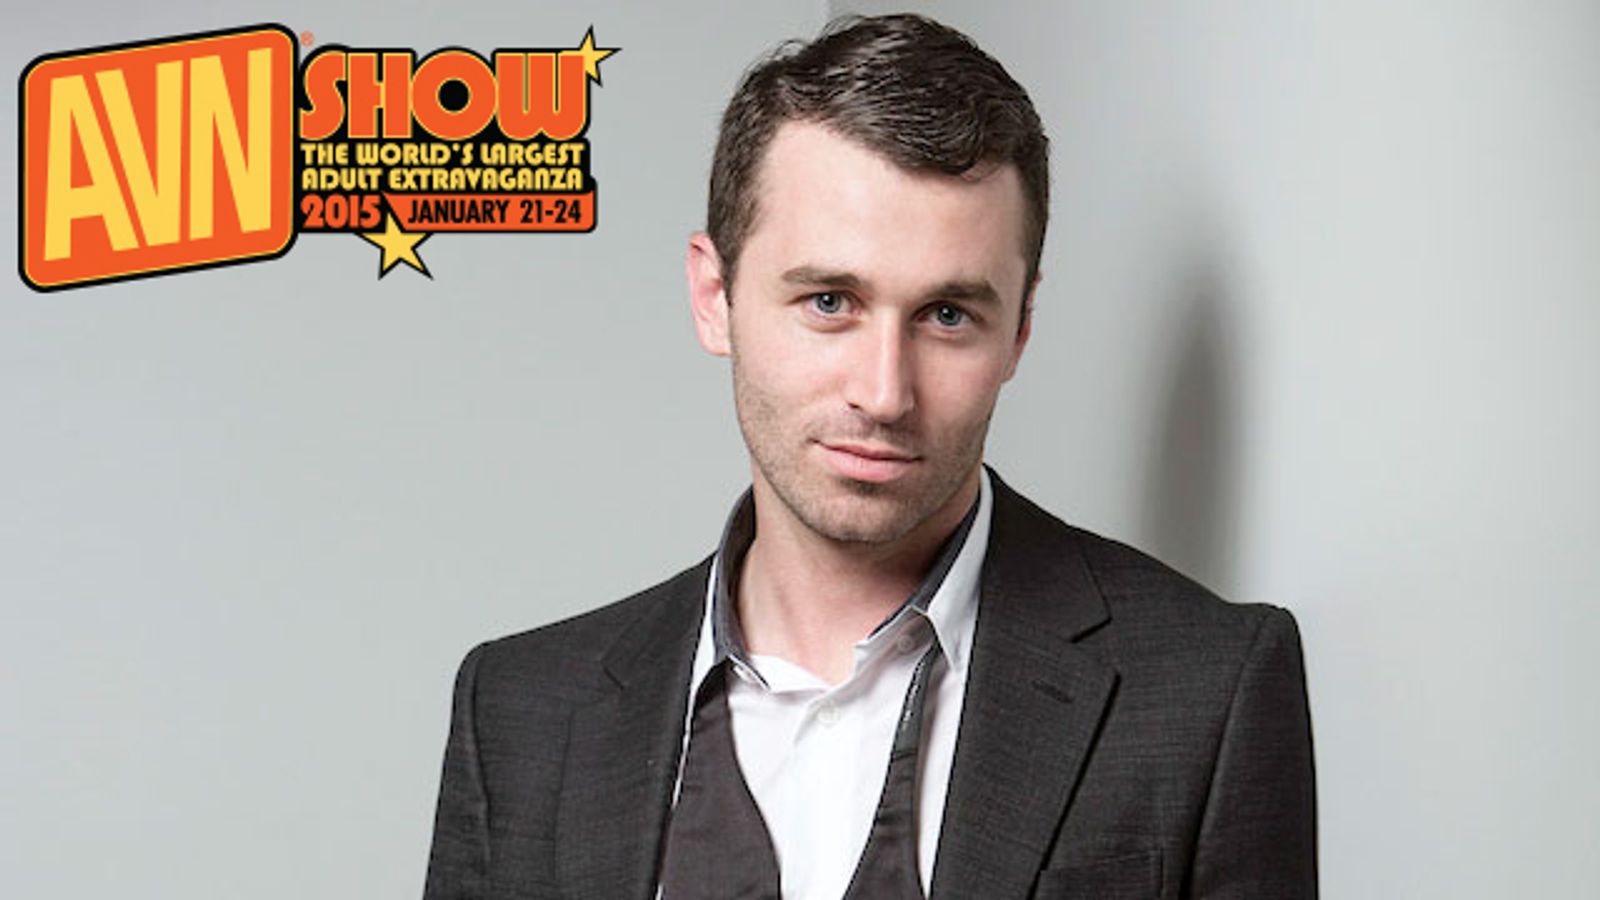 AVN Teams with James Deen to Promote 2015 AEE